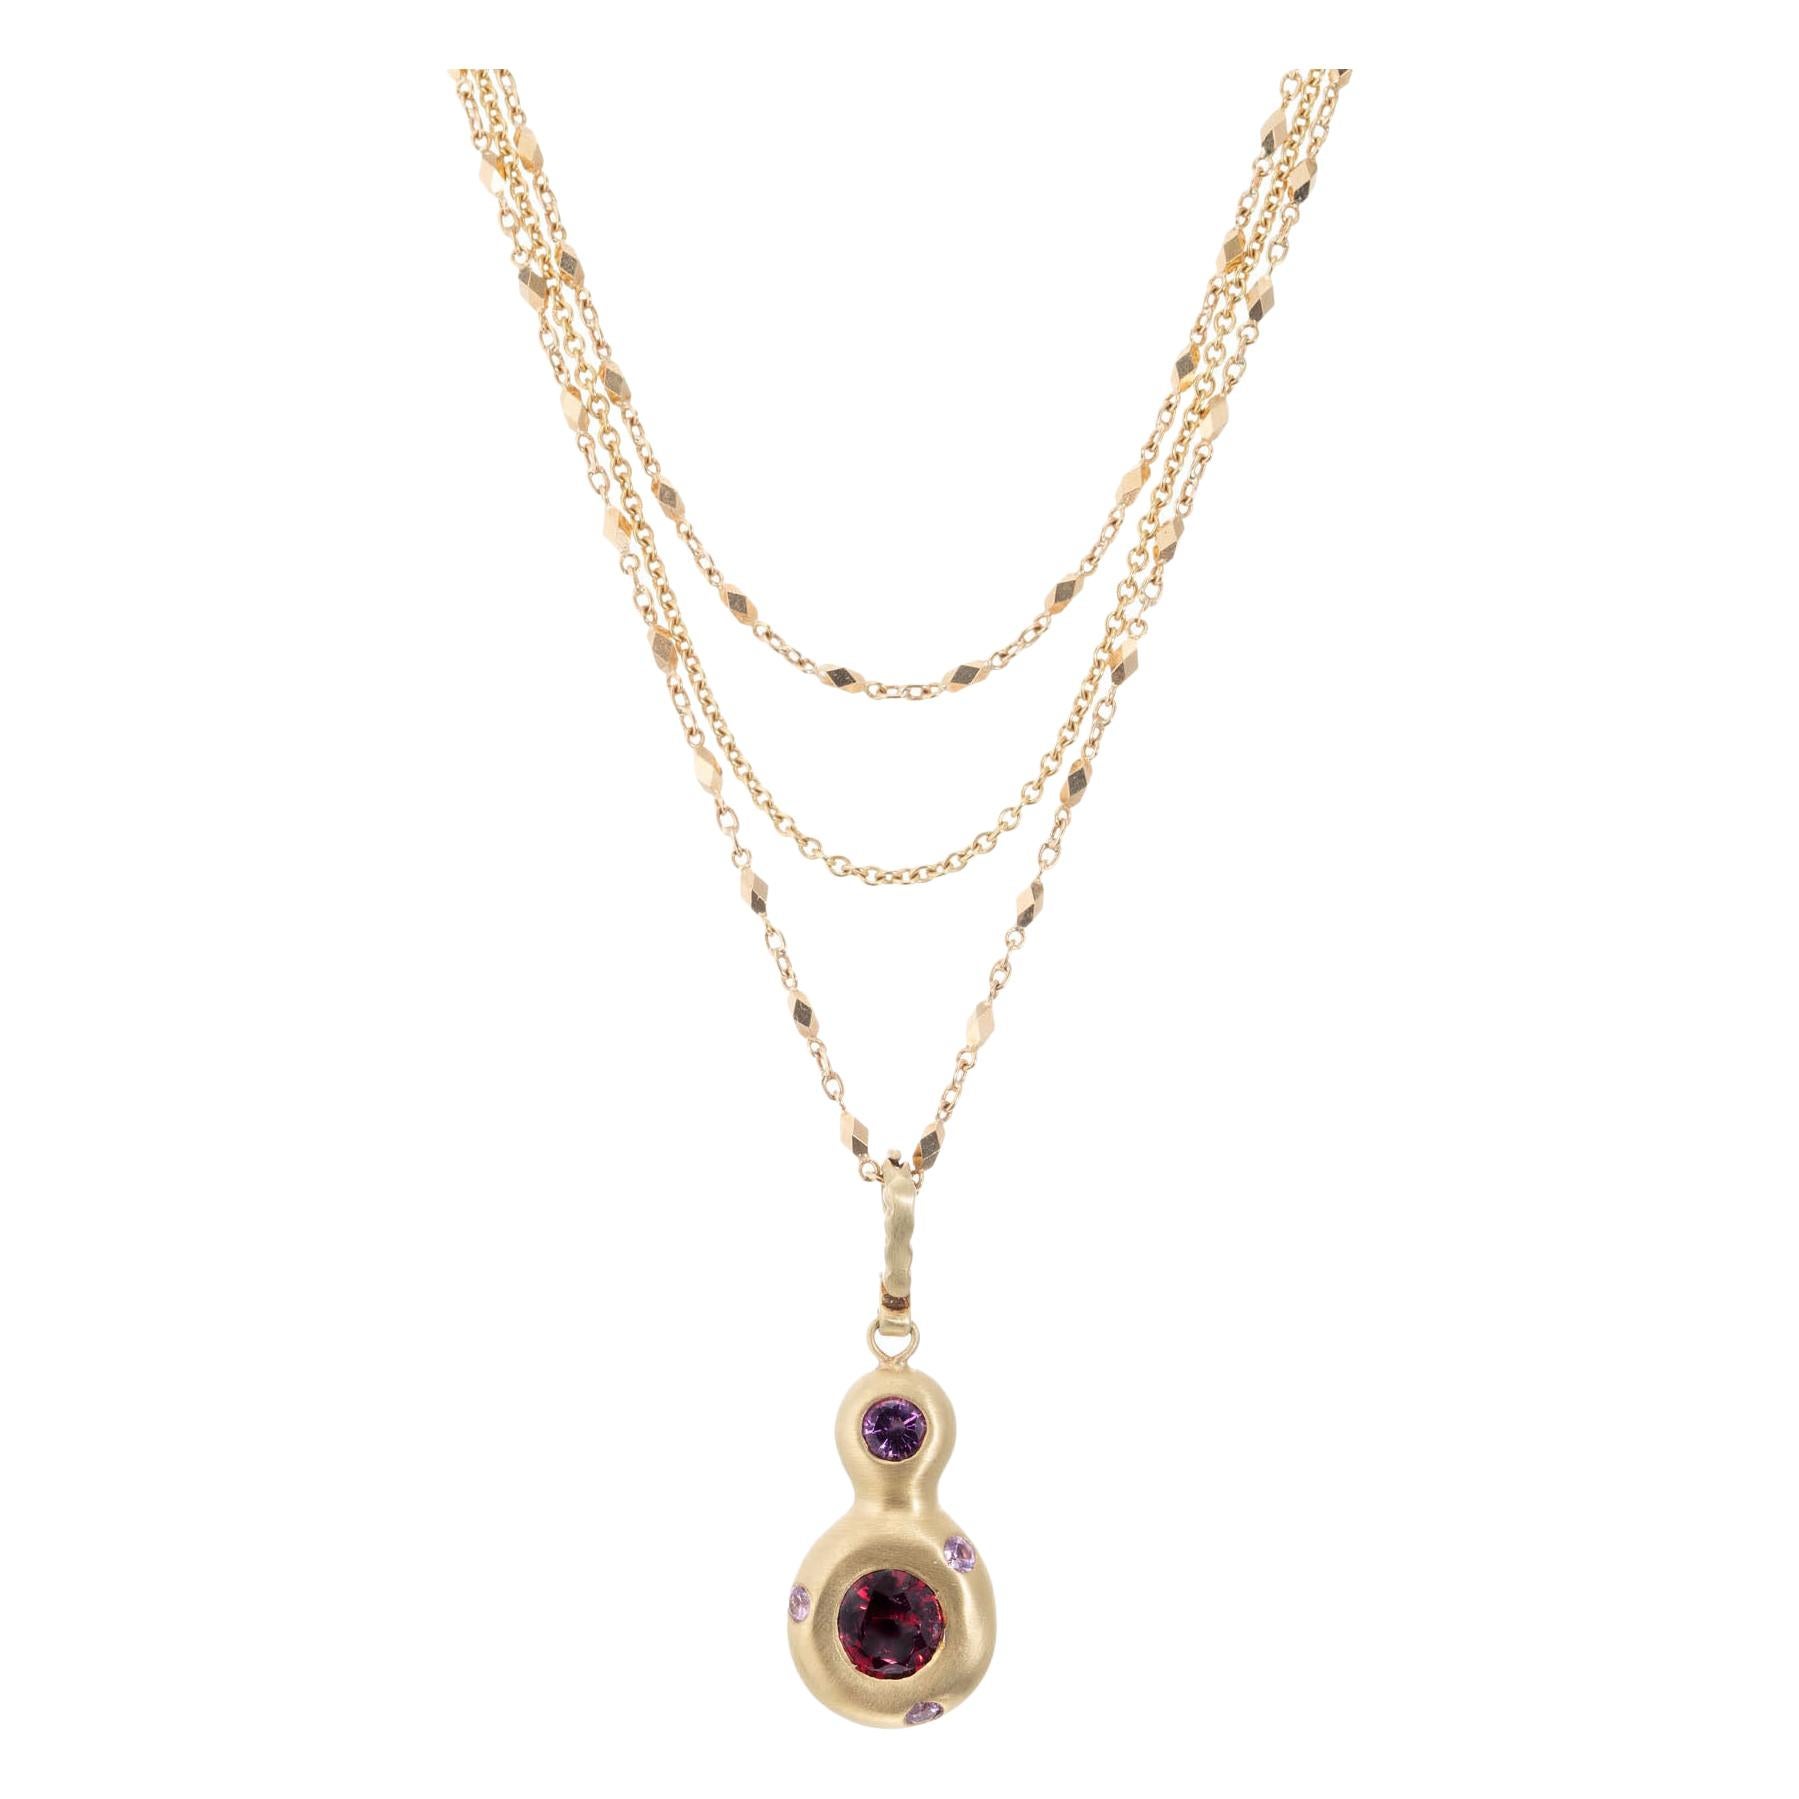 Robin Rotenier GIA Certified 1.32 Carat Spinel Sapphire Gold Pendant Necklace For Sale